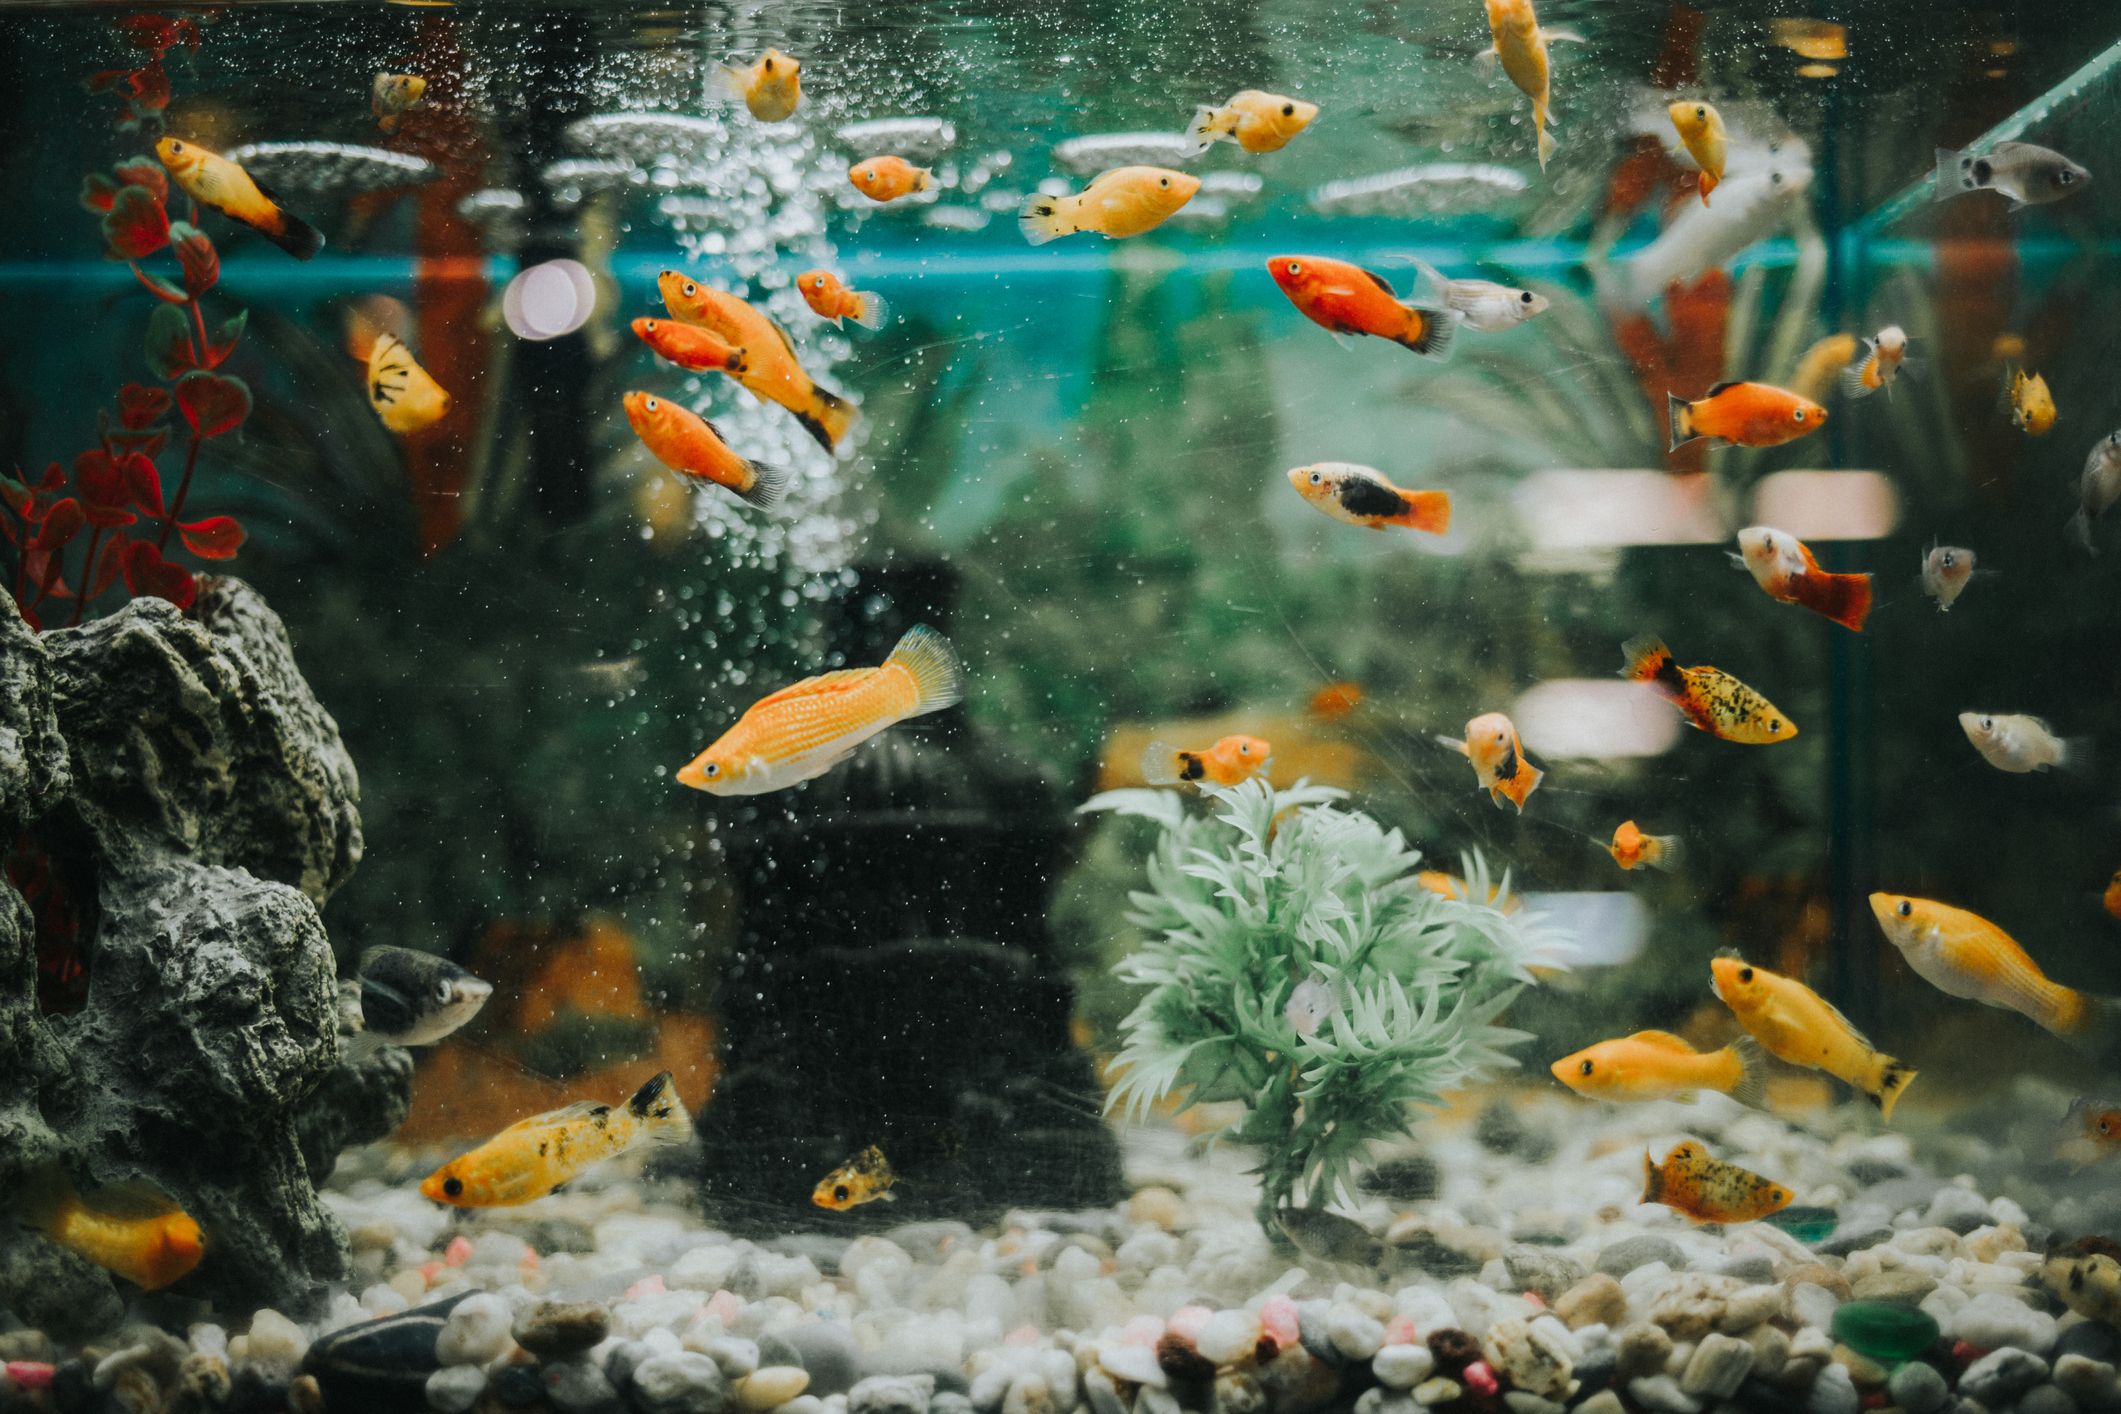 Home Aquarium: A Fish Tank Is Basically Live Art for Your Home—Here's How  to Keep One